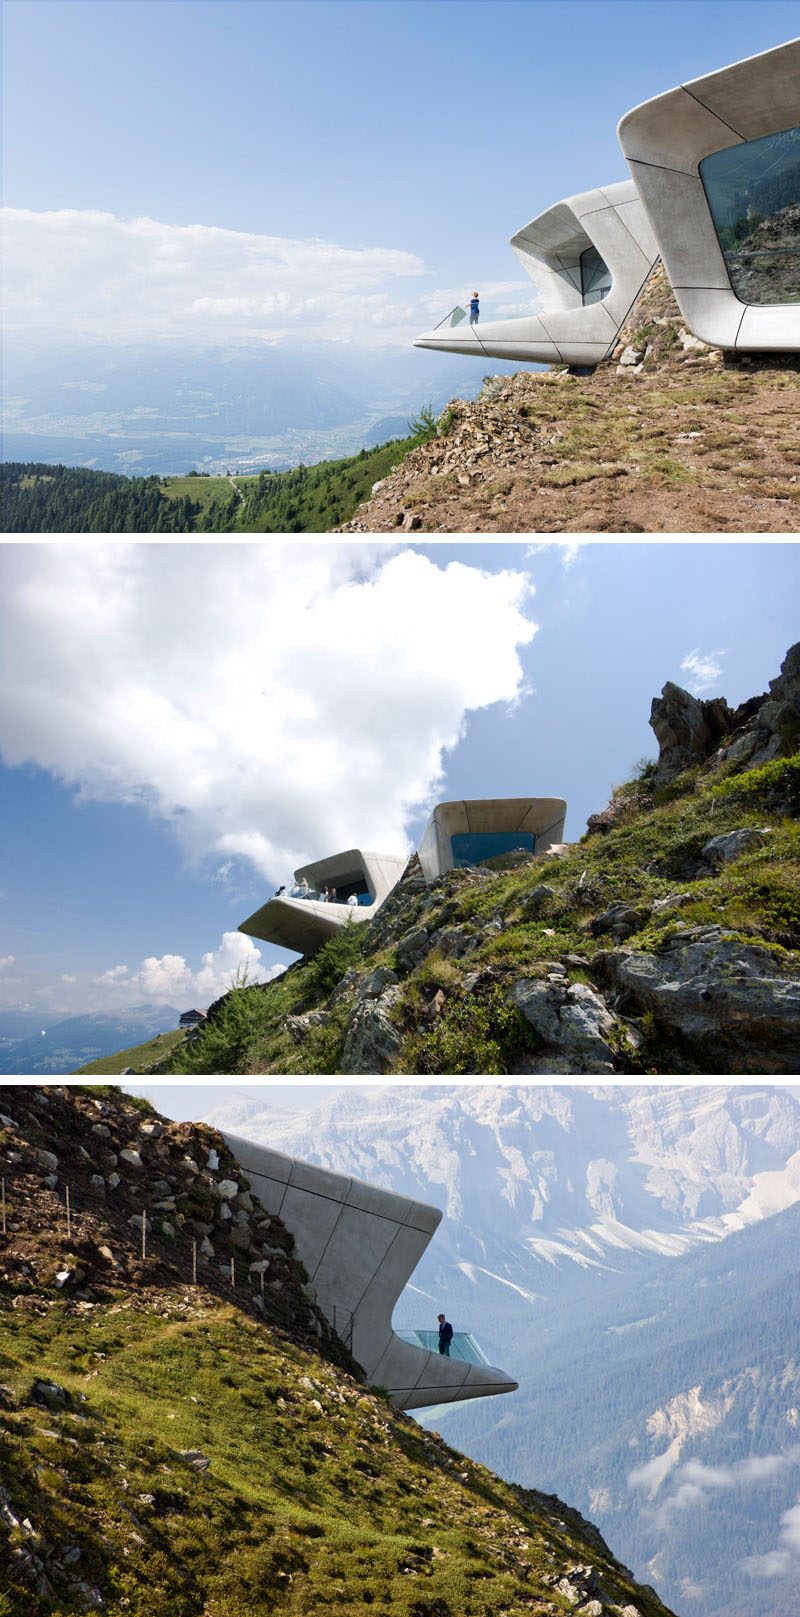 The Messner Mountain Museum Corones in South Tyrol, Italy, is made from thick concrete and has been embedded into the mountain, projecting out to provide incredible views of the valley below and the mountains surrounding it.